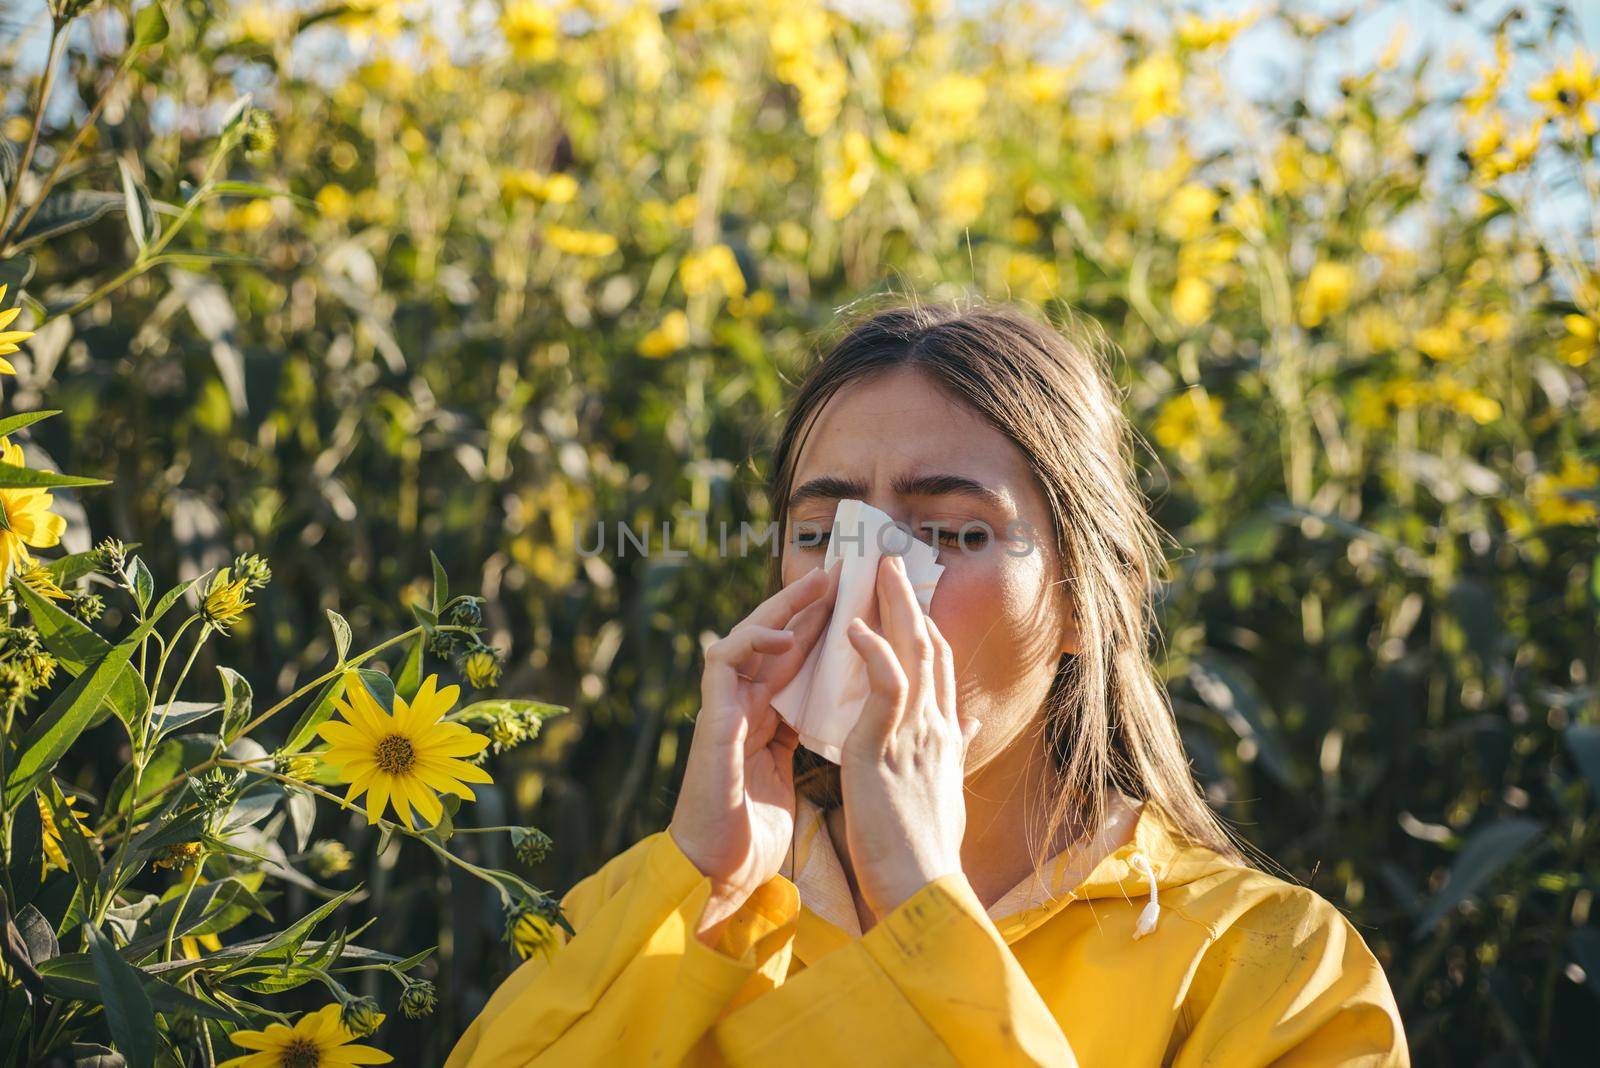 Woman with napkin fighting blossom allergie outdoor. Portrait of an allergic girl surrounded by seasonal flowers in bright yellow color. Beautiful girl having an allergic reaction to flowers